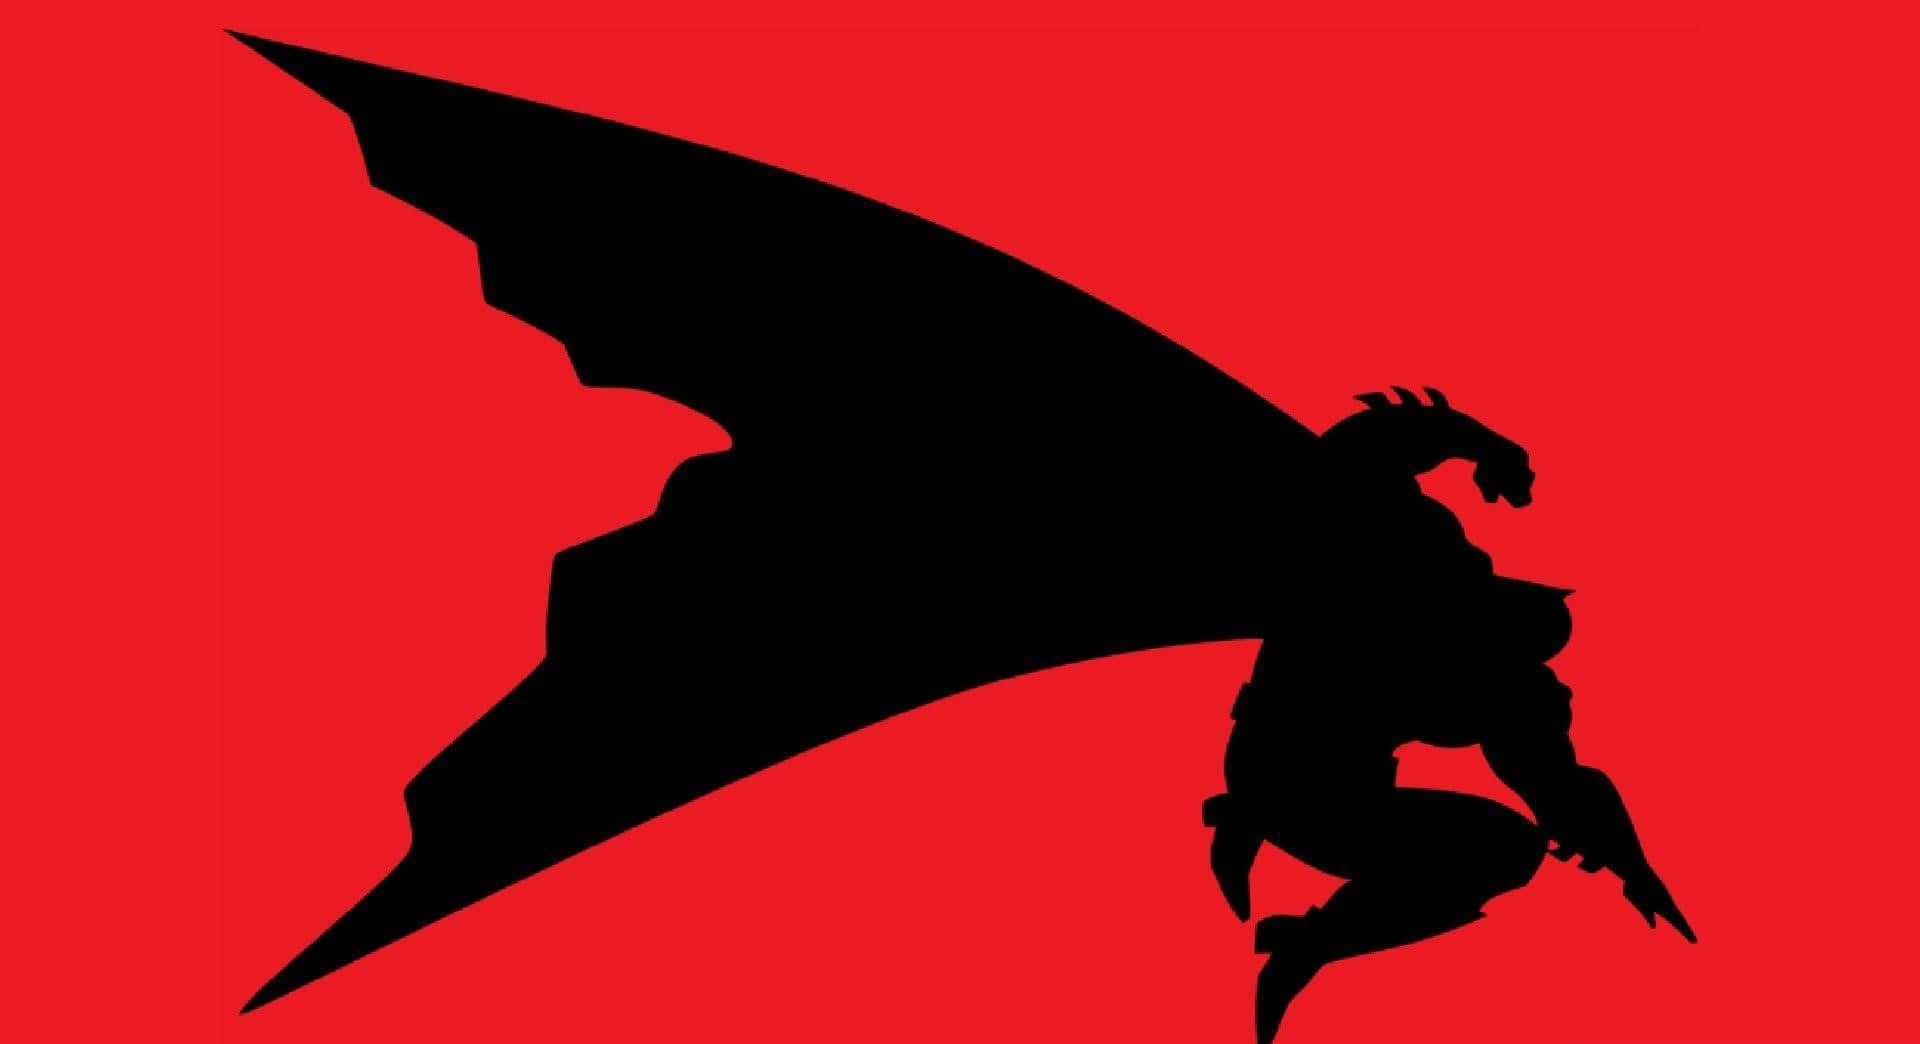 The Dark Knight Returns: Batman in Action Against the Sinister Forces of Gotham City Wallpaper